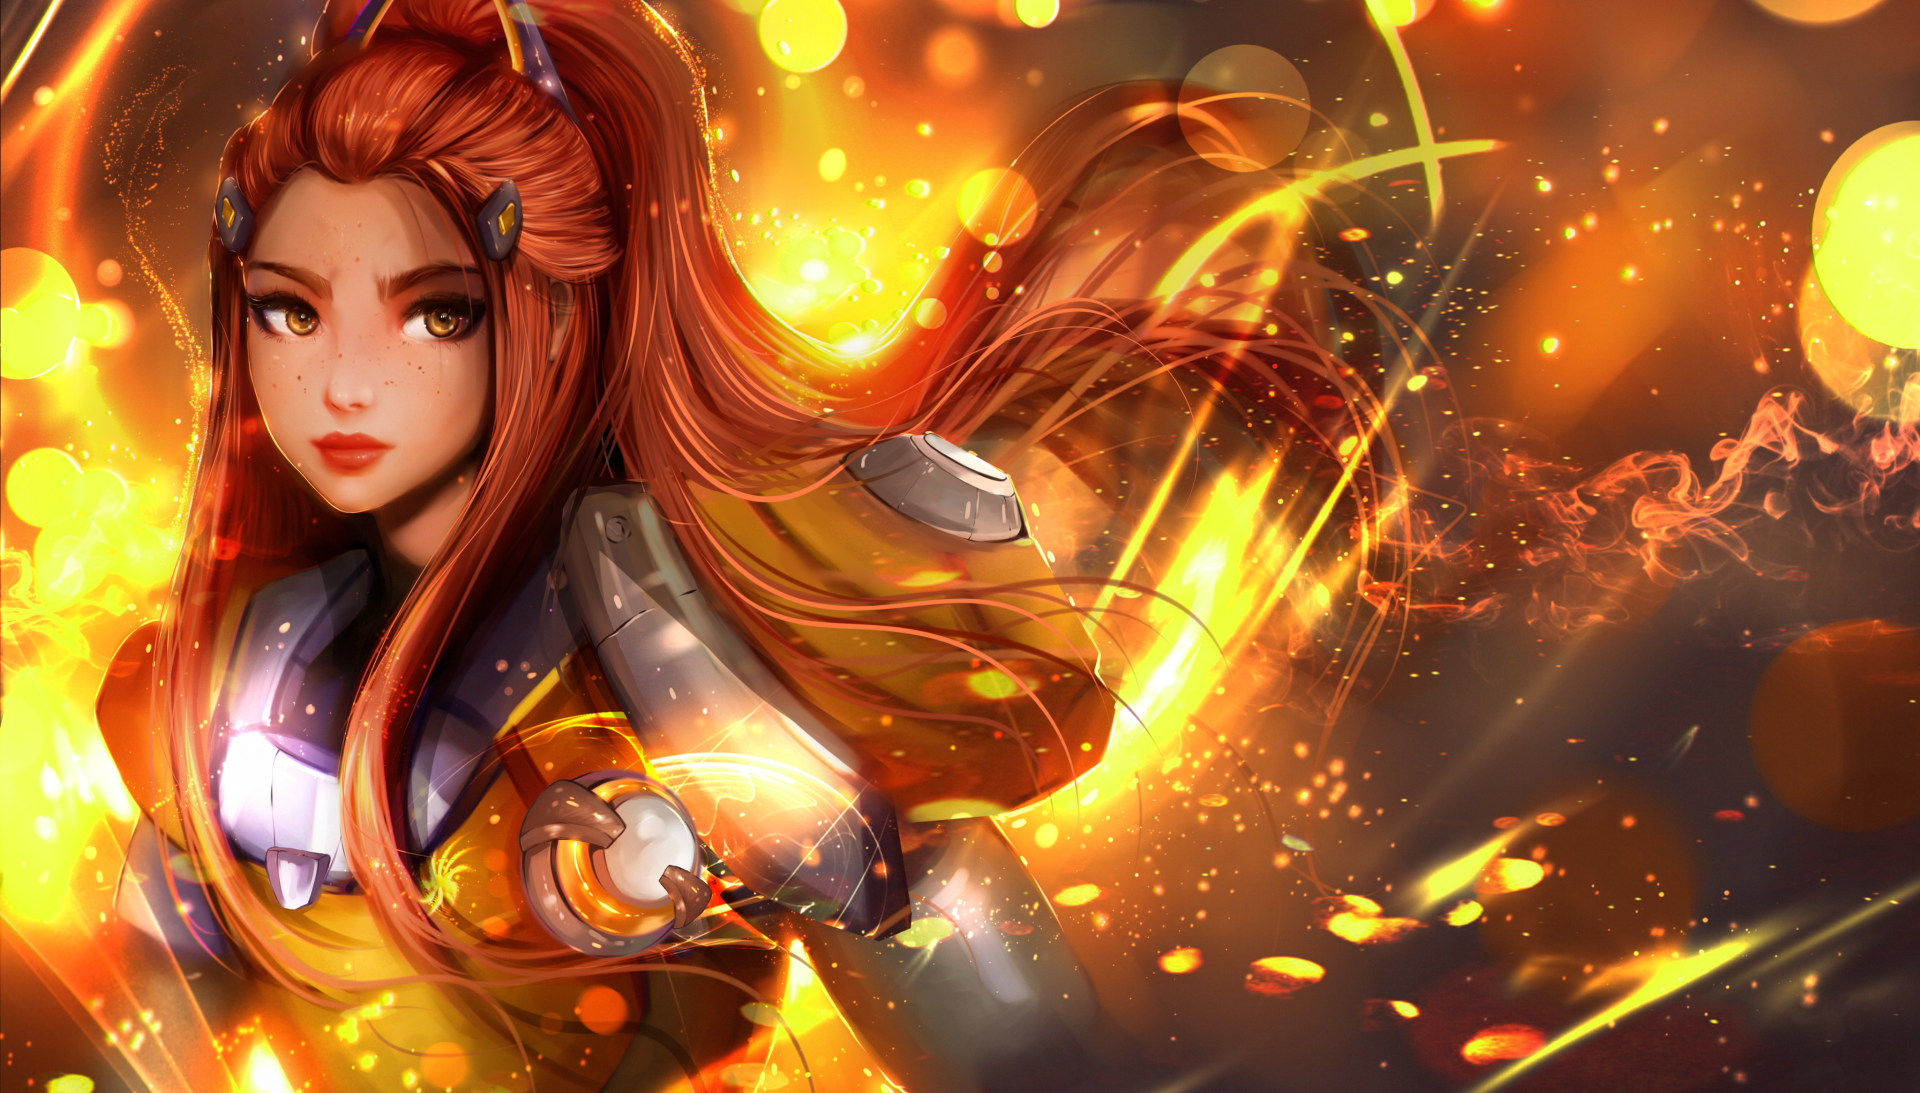 34 Brigitte (Overwatch) HD Wallpapers | Background Images - Wallpaper Abyss